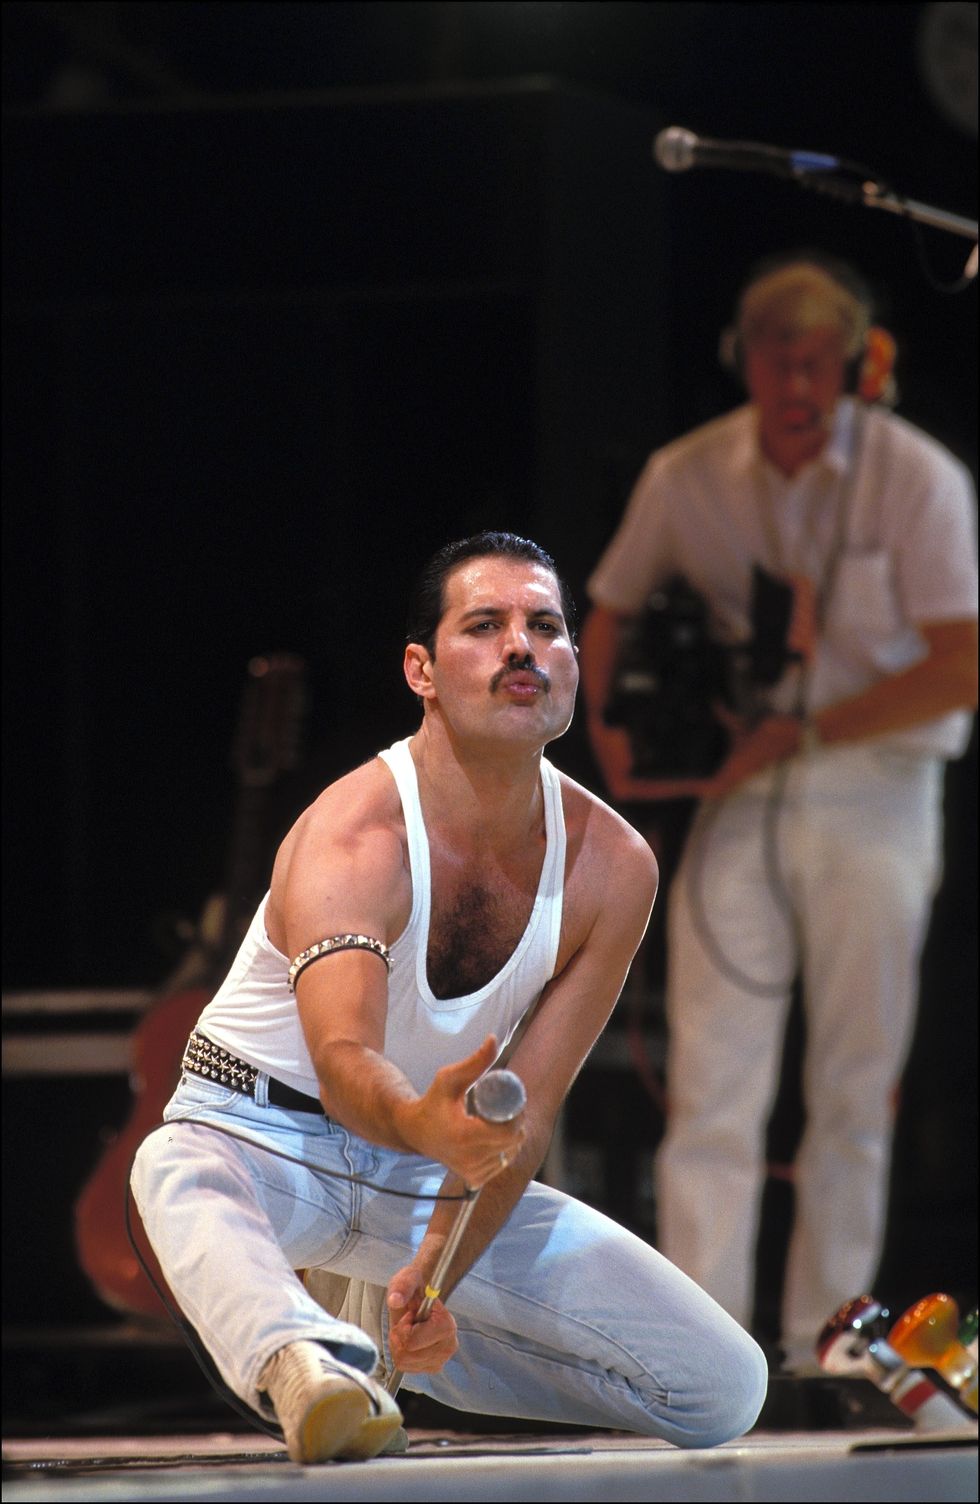 london   july 13  singer freddie mercury of queen performs during live aid at wembley stadium on 13 july 1985  photo by georges de keerlegetty images